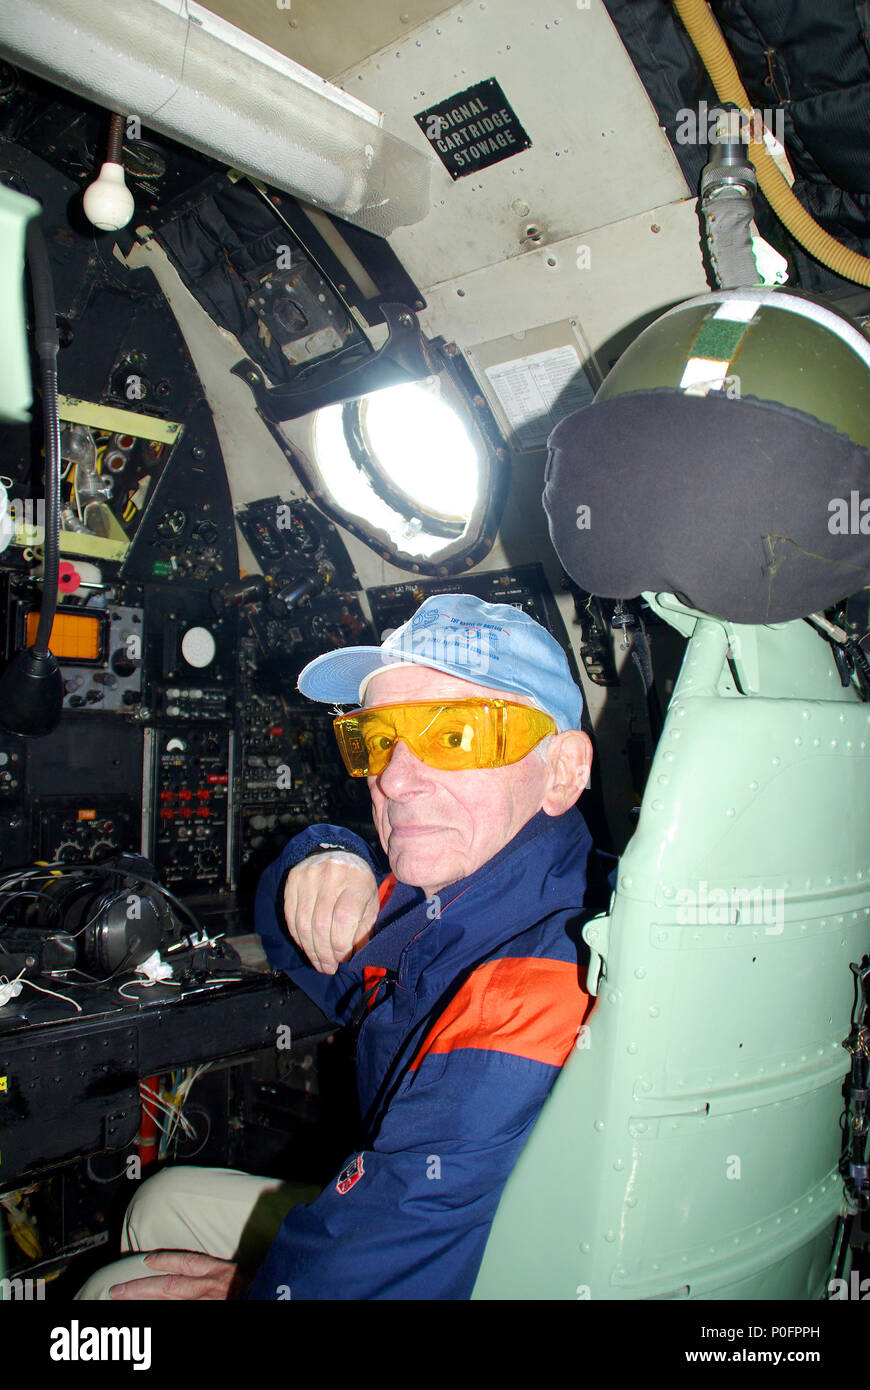 Bill Stableford in the cockpit of an Avro Vulcan jet bomber, an aircraft for which he designed some of the systems when working for Avro Stock Photo